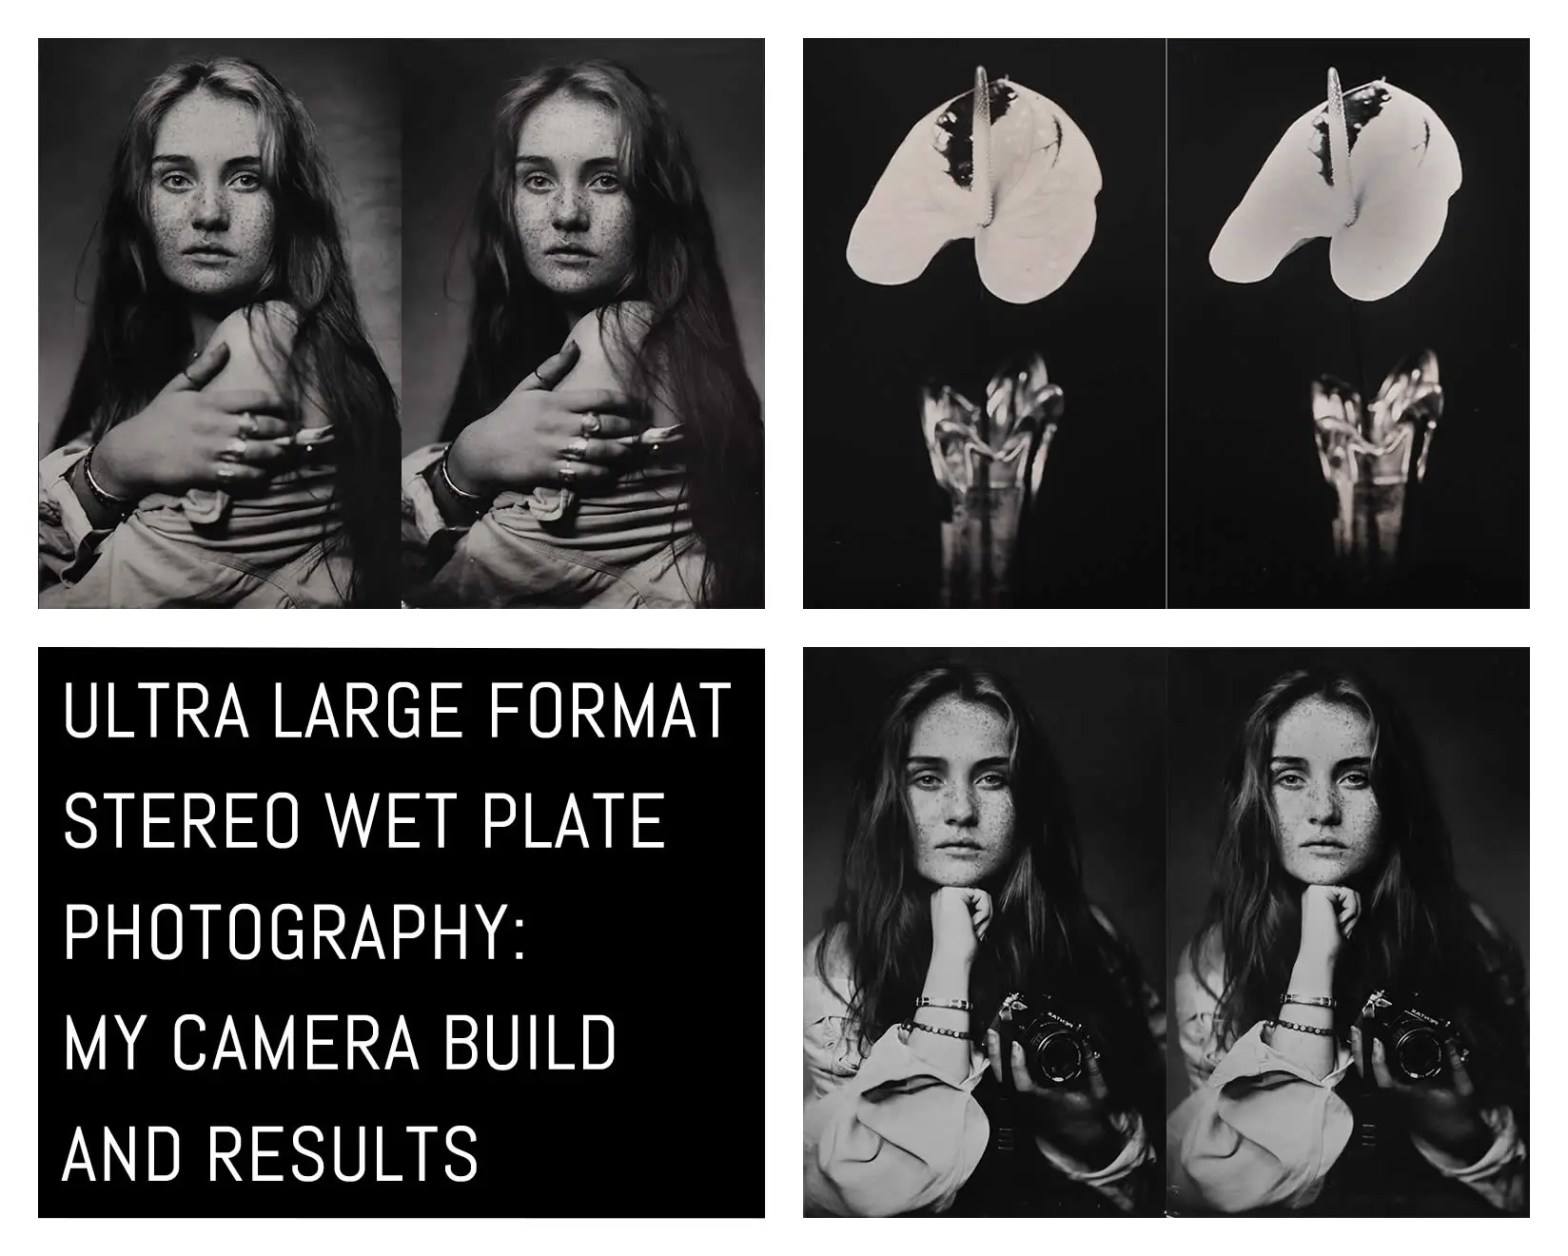 Cover: Ultra large format stereo wet plate photography - my camera build and results